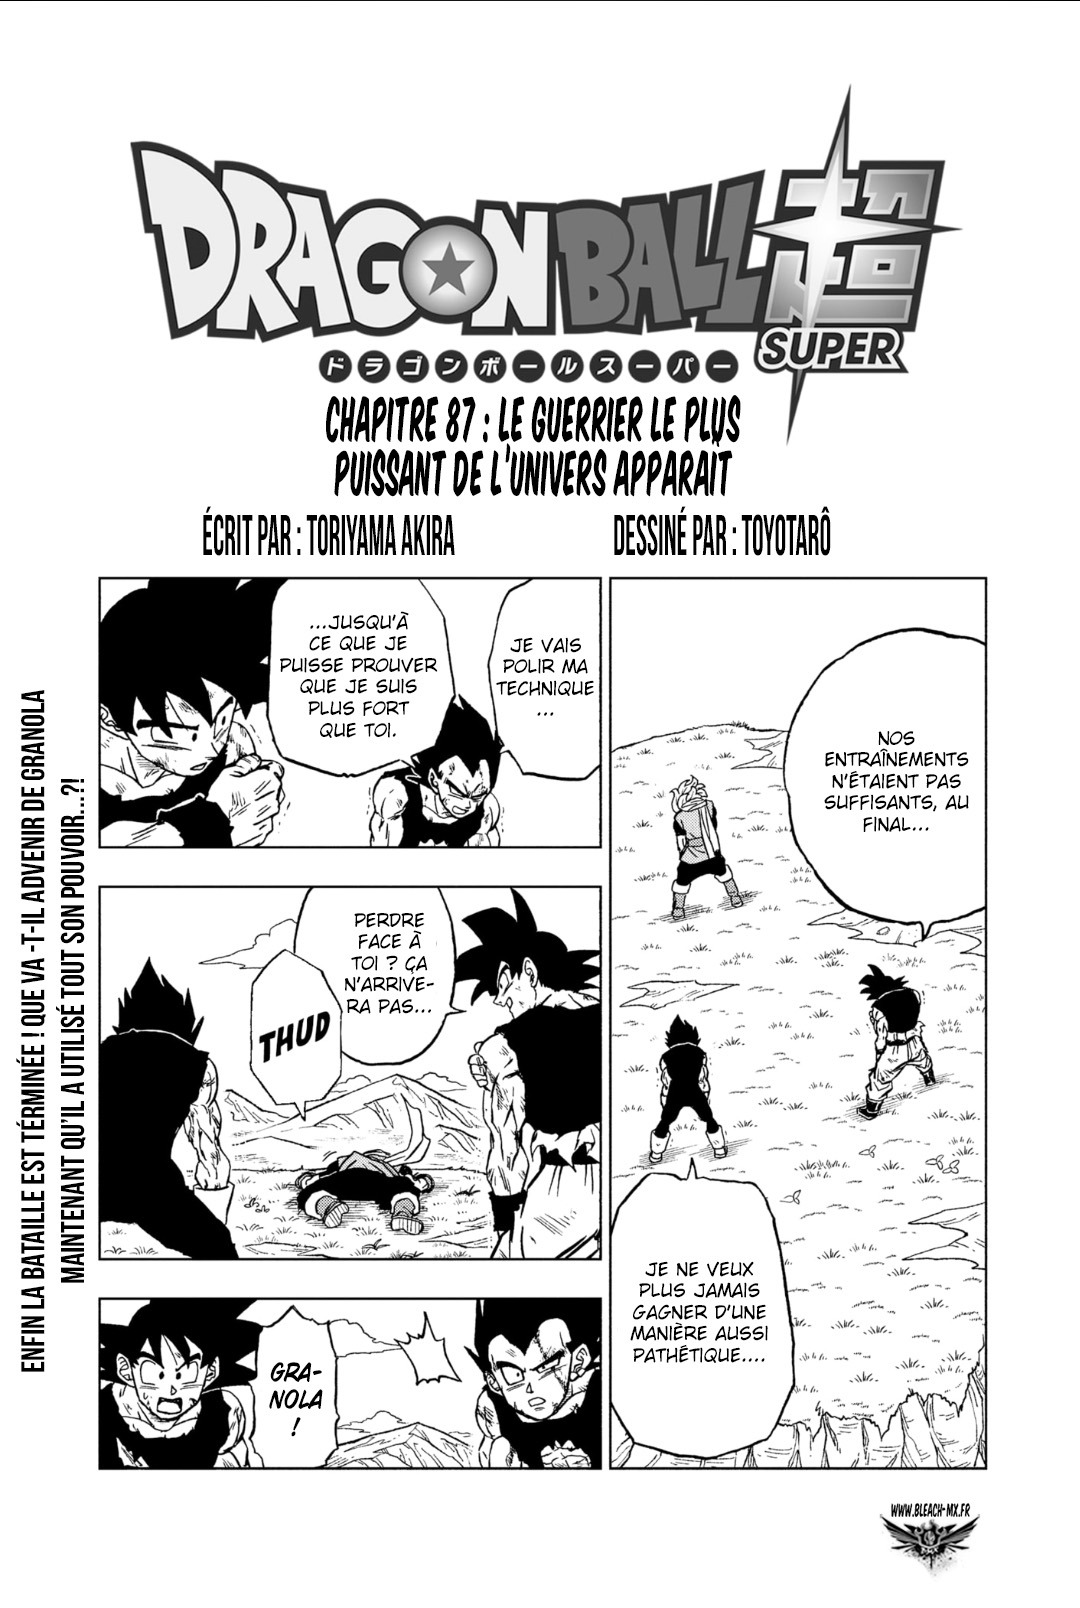 Dragon Ball Super: Chapter chapitre-87 - Page 1